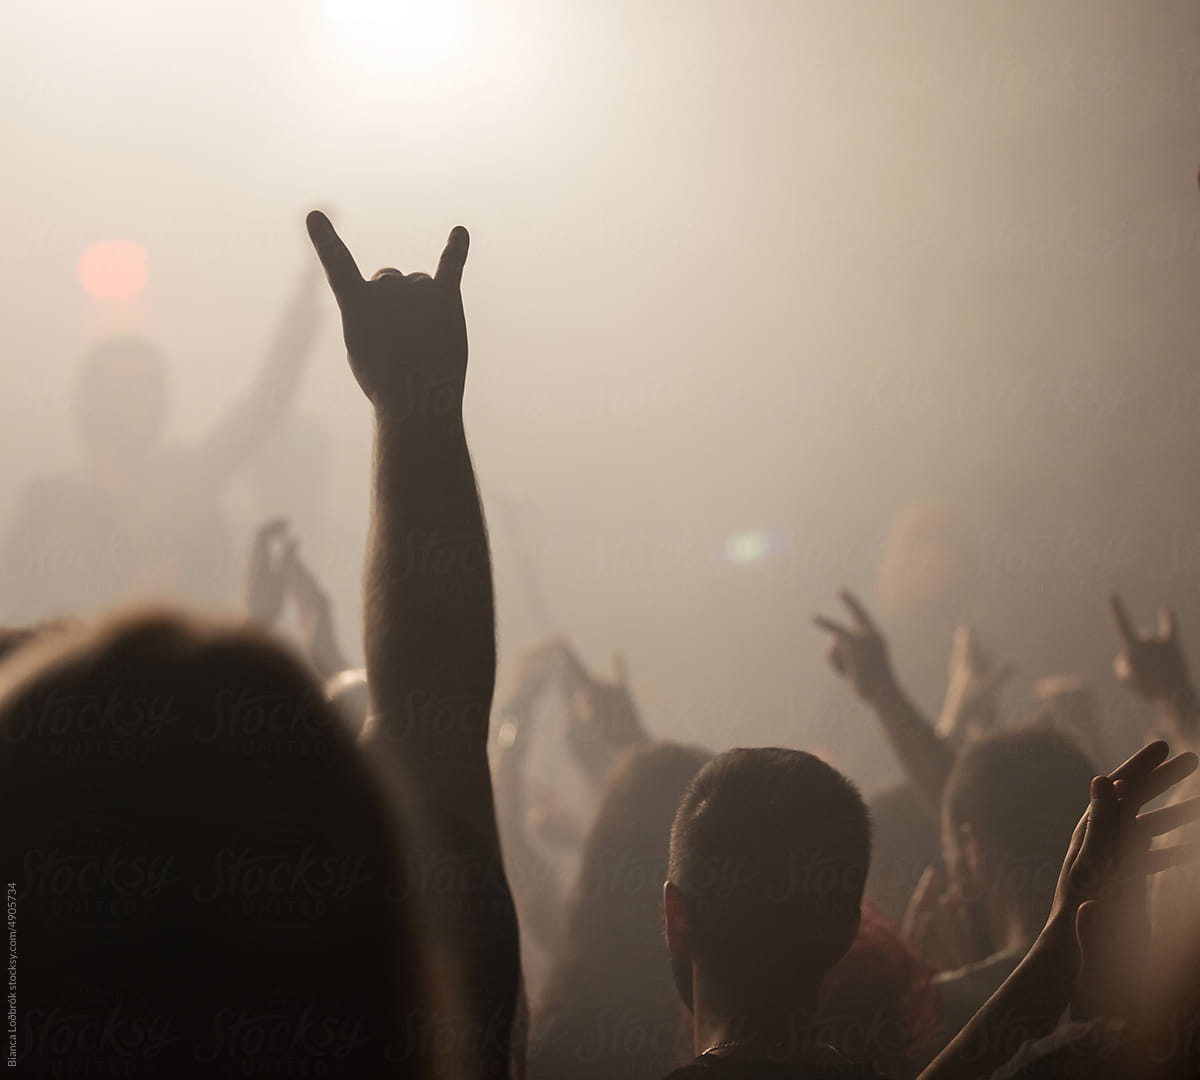 Audience response to heavy metal rock gig